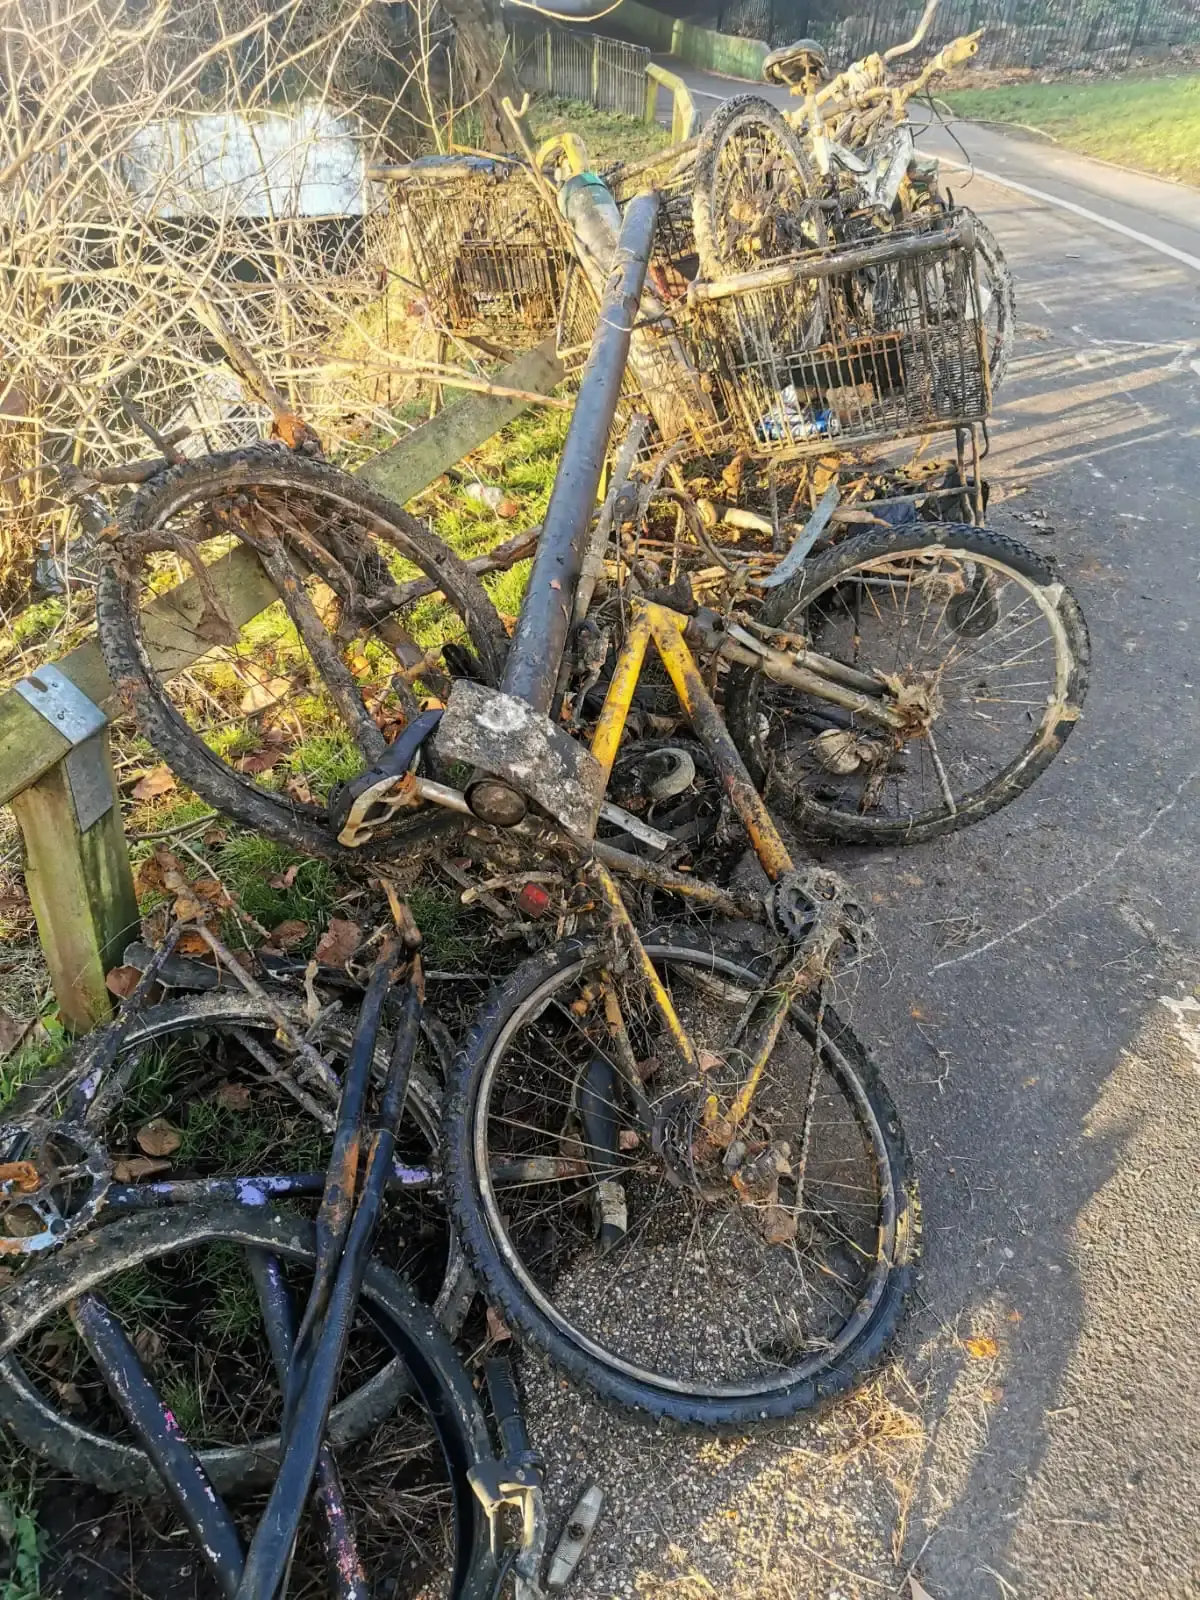 Rusted bicycles and shopping trolleys pulled from river